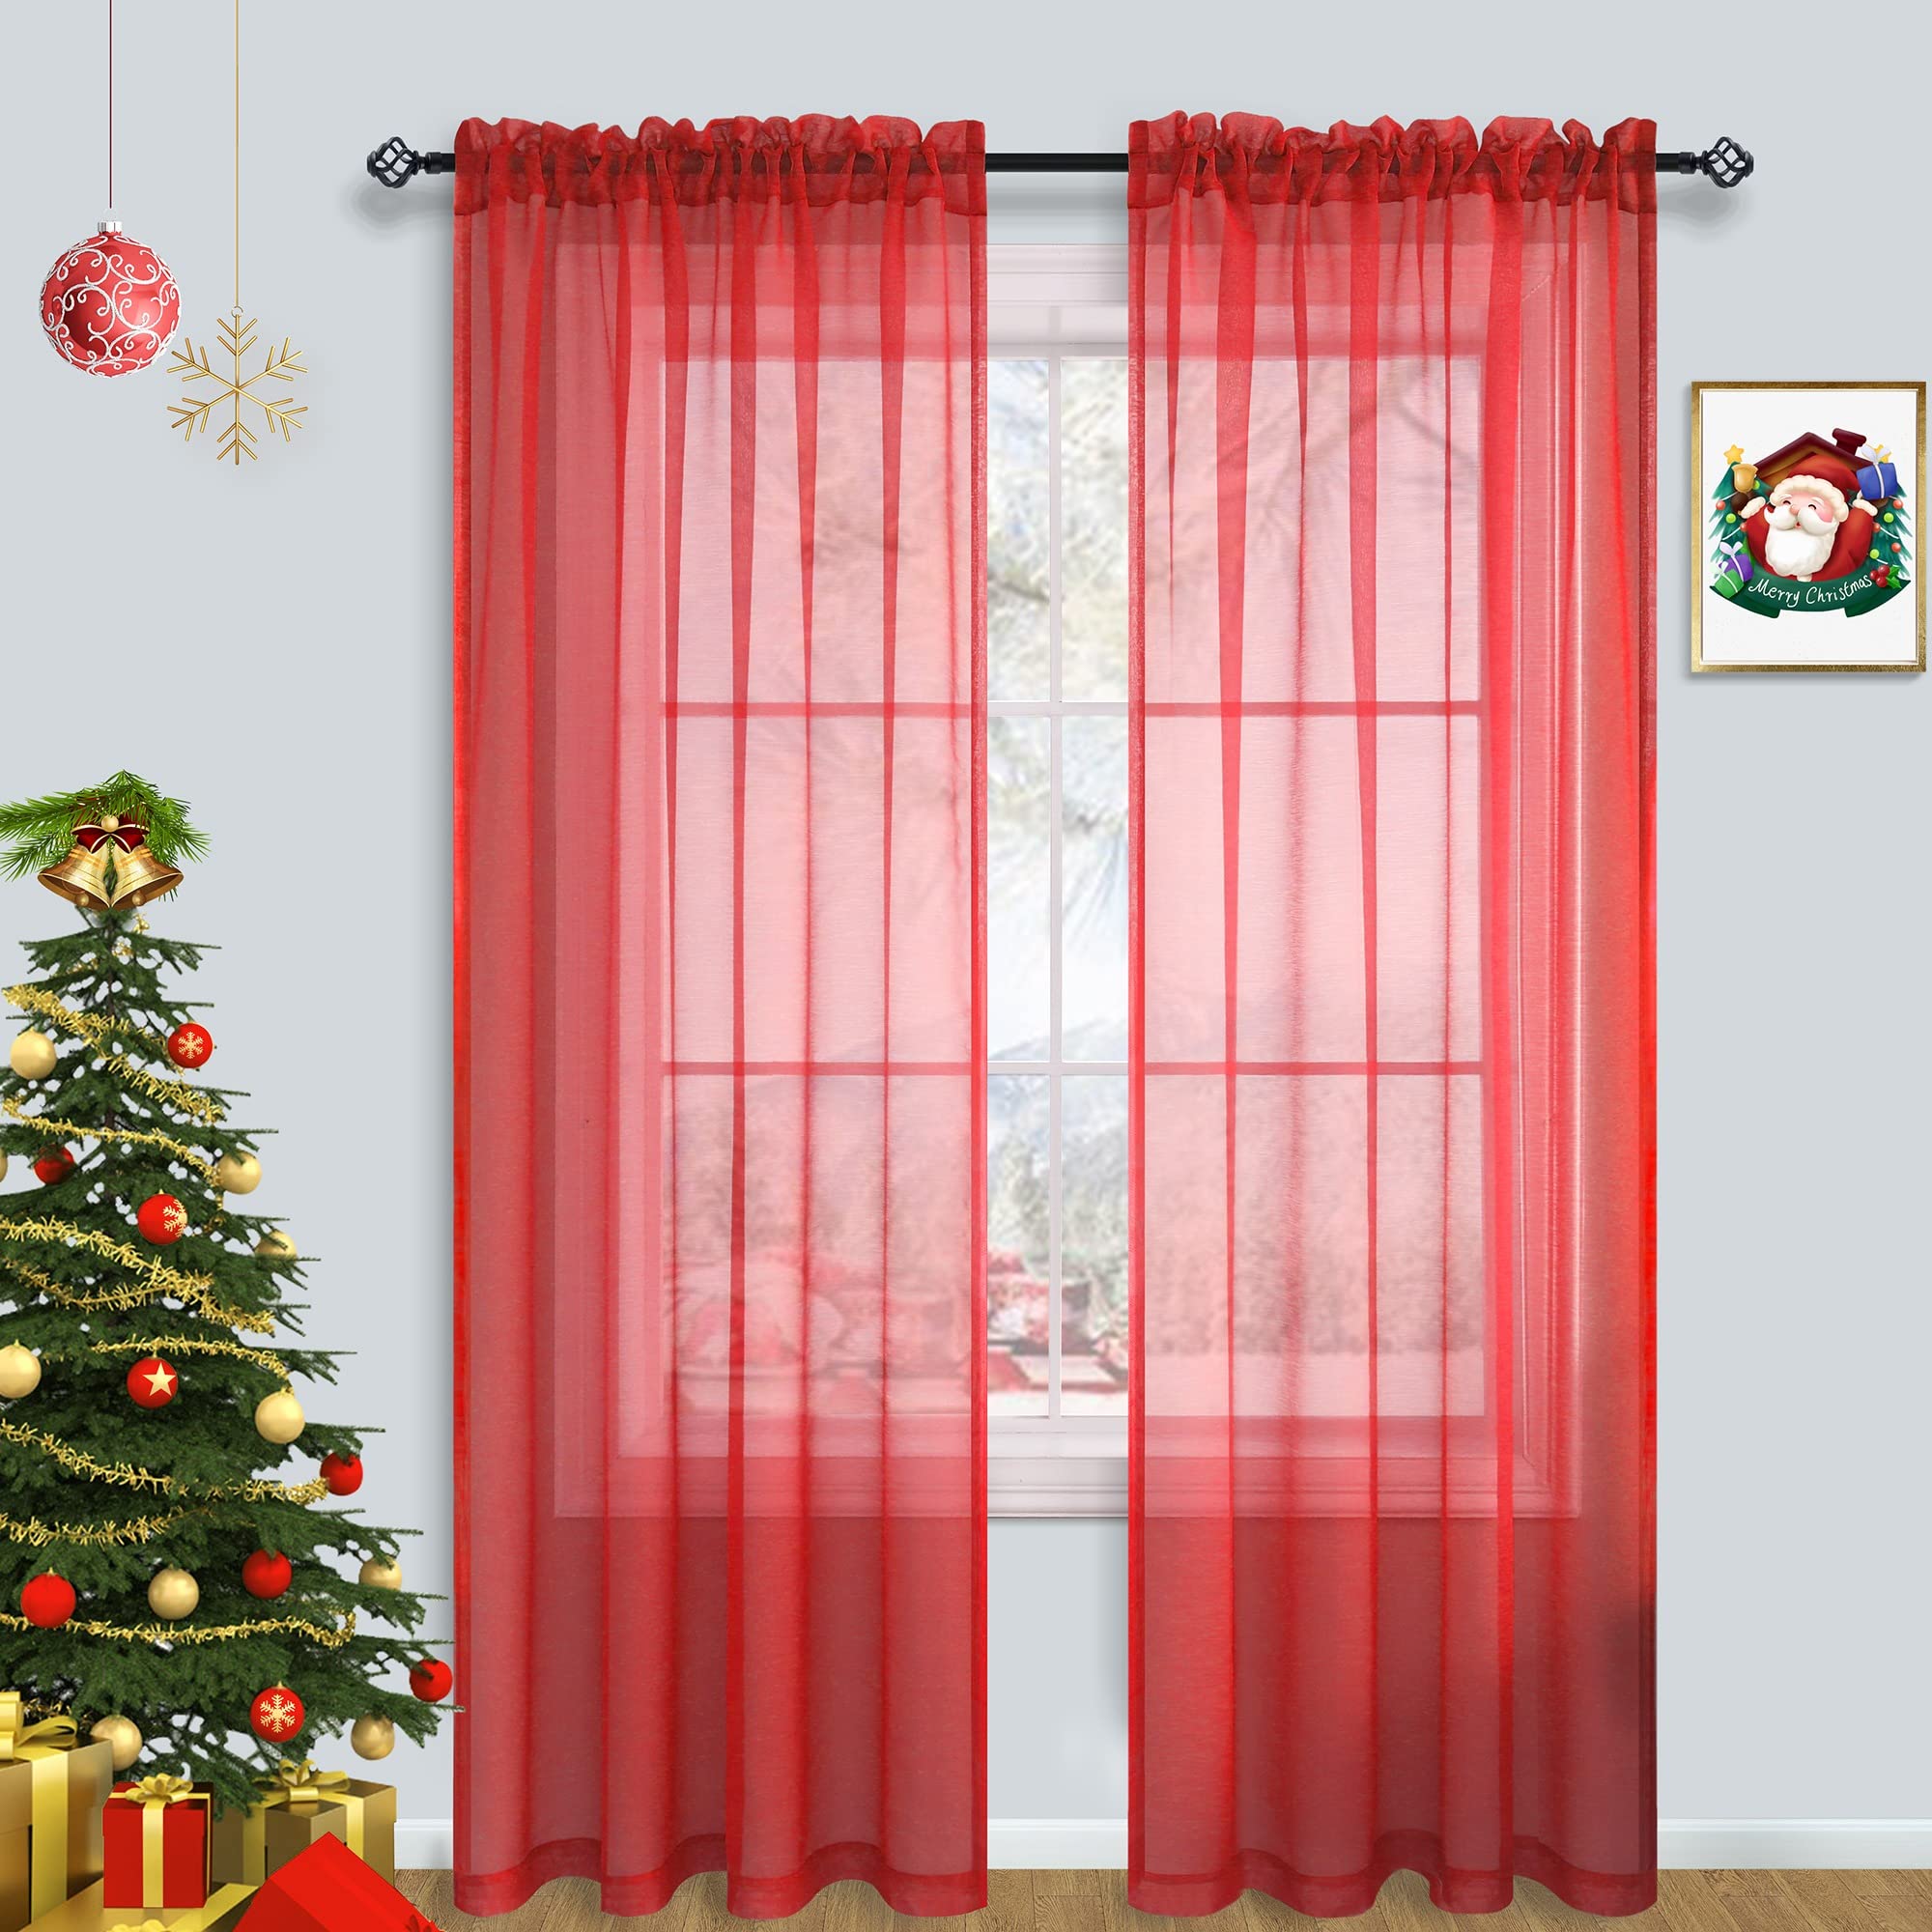 Pitalk Red Sheer curtains 84 Inch Length for Living Room 2 Panels Set christmas Decor Rod Pocket Voile Tulle Window Xmas Holiday curtai